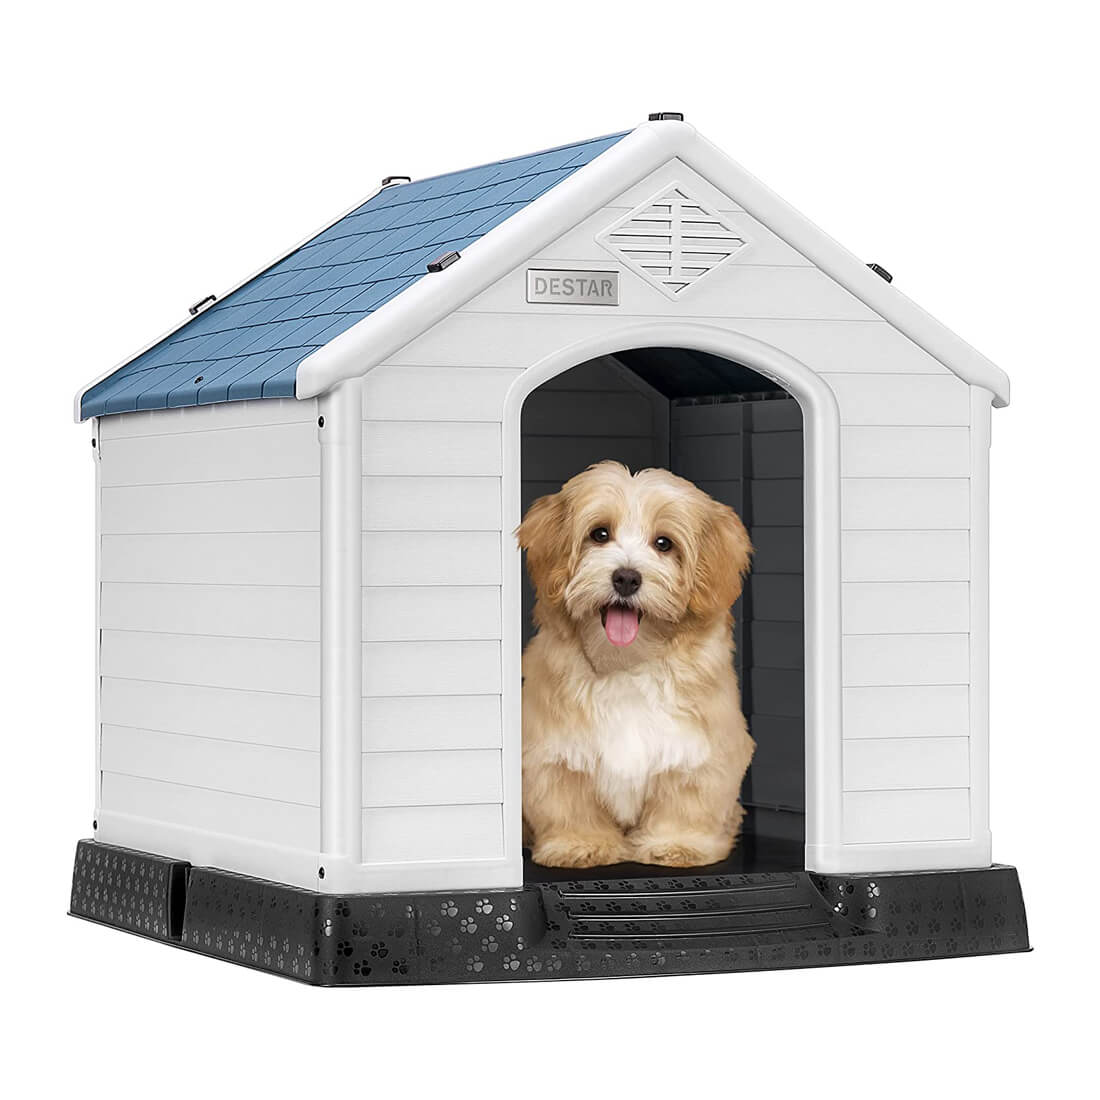 DEStar Durable Waterproof Plastic Pet Dog House Indoor Outdoor Puppy Shelter Kennel with Air Vents and Elevated Floor